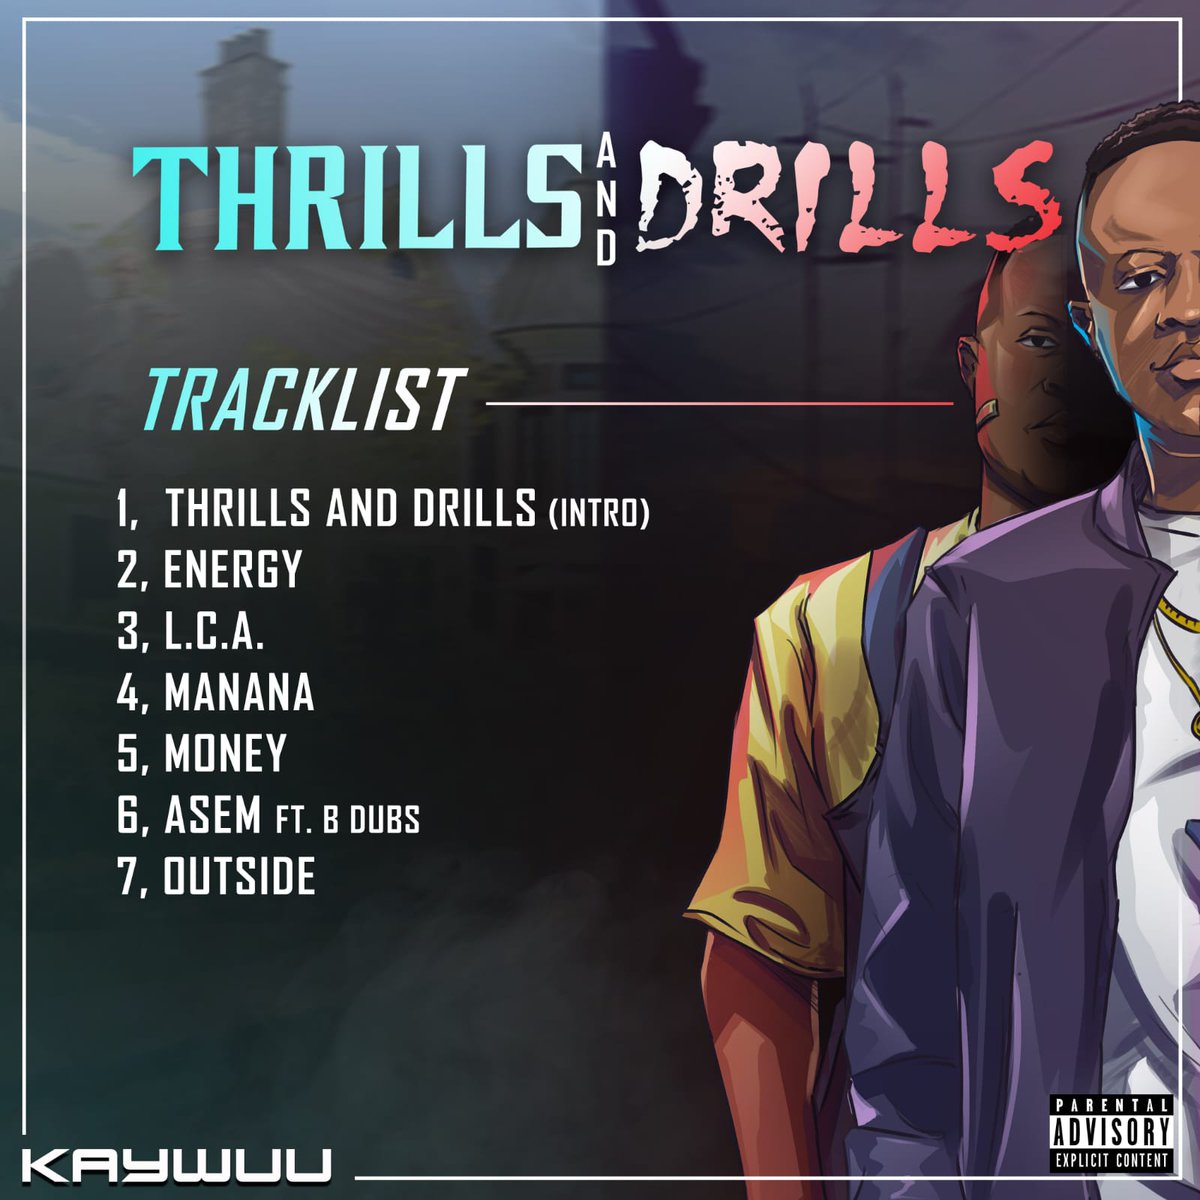 Rate it out of 10 #ThrillsAndDrillsEP

Me 8/10